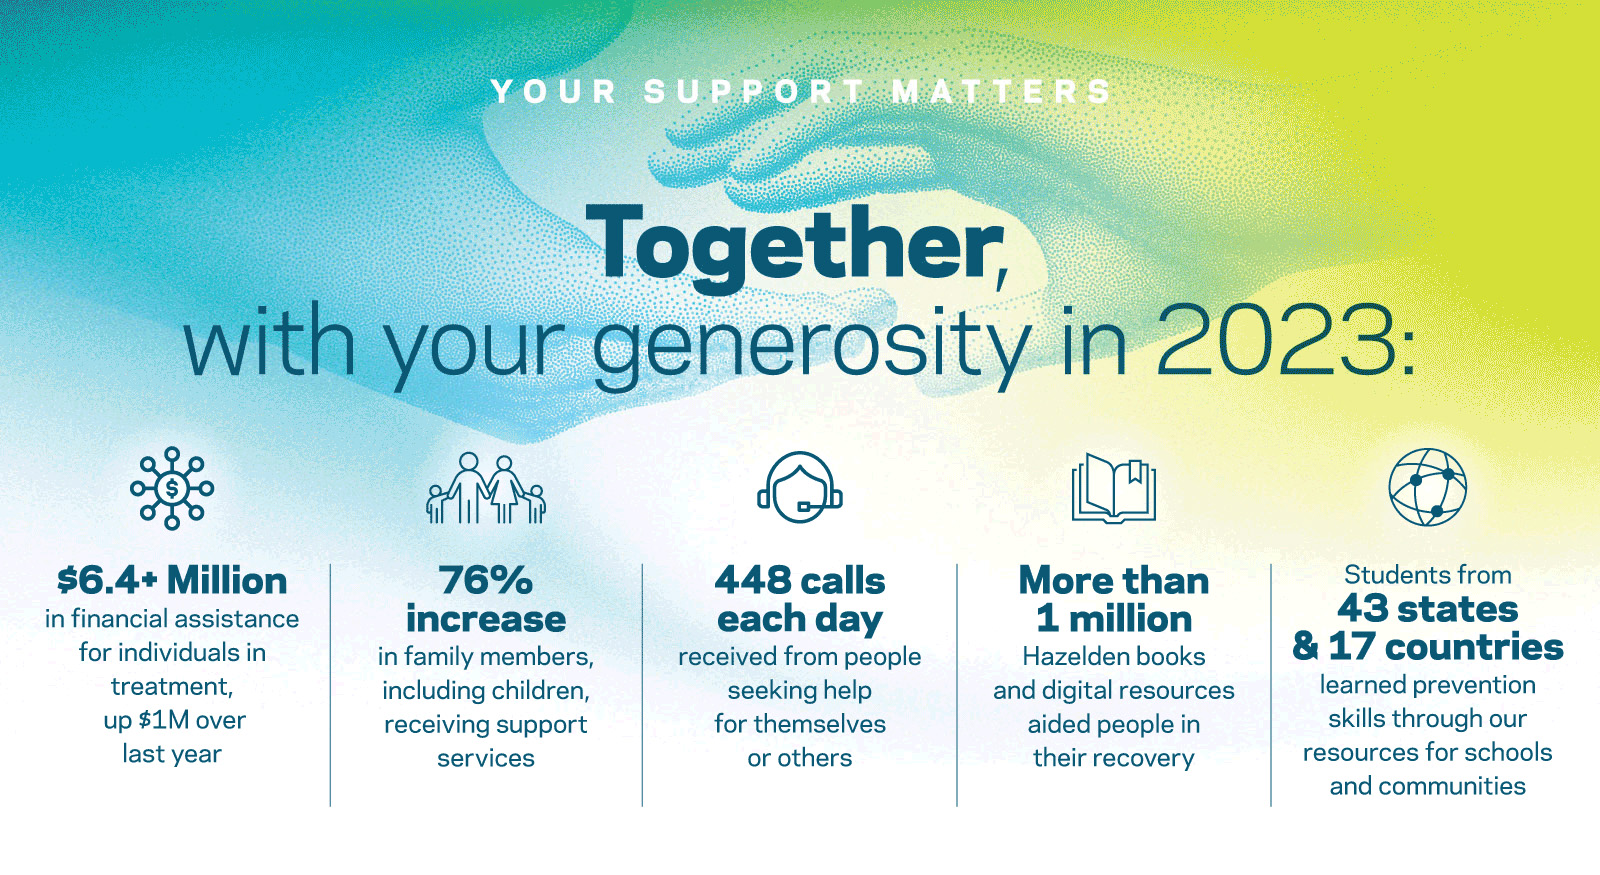 Together with your generosity in 2023: 6.4 million in financial assistance. 76 percent increase in families receiving support. 448 calls each day. More than 1 million books and digital resources. Students from 43 states and 17 countries. 